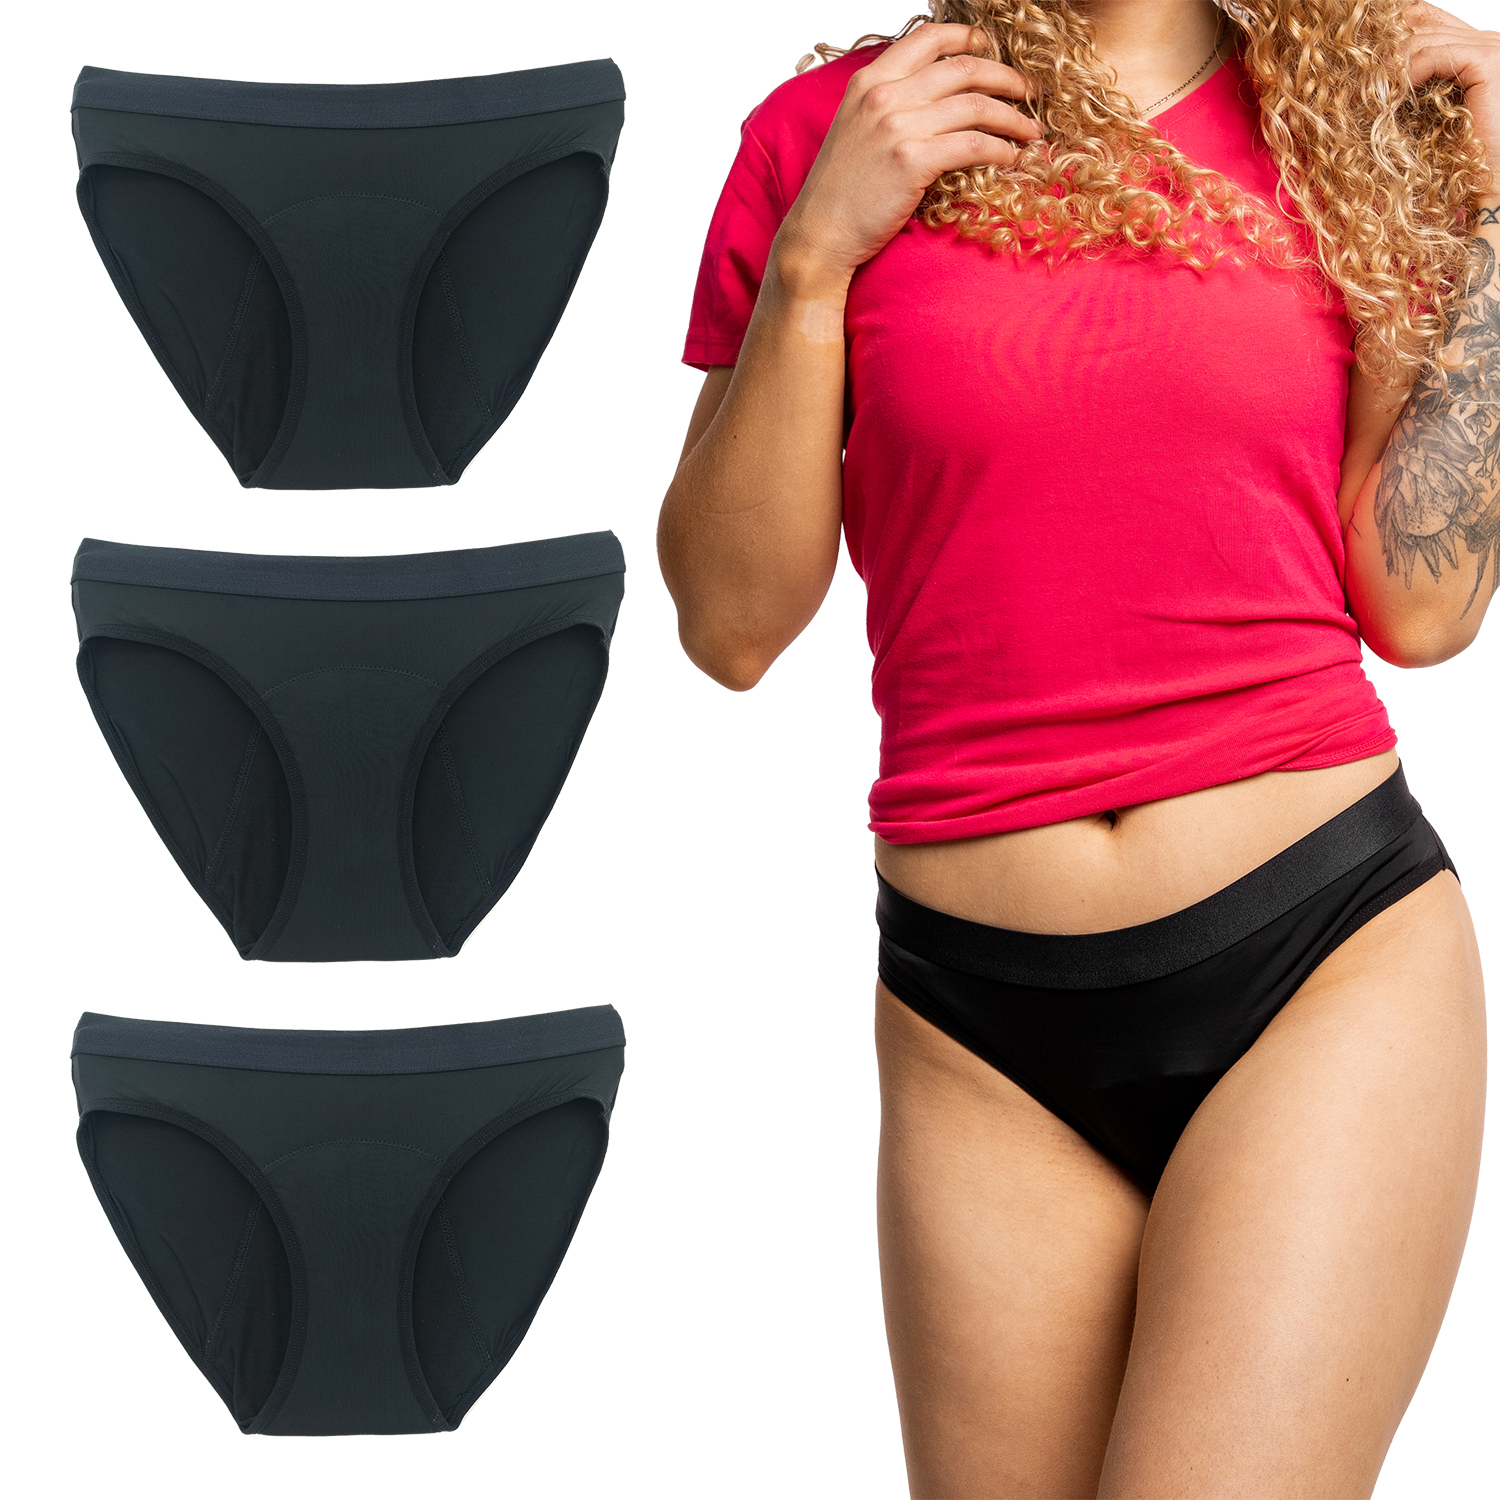 Why You Should Get Rid of Your Spandex Undergarments – Cottonique